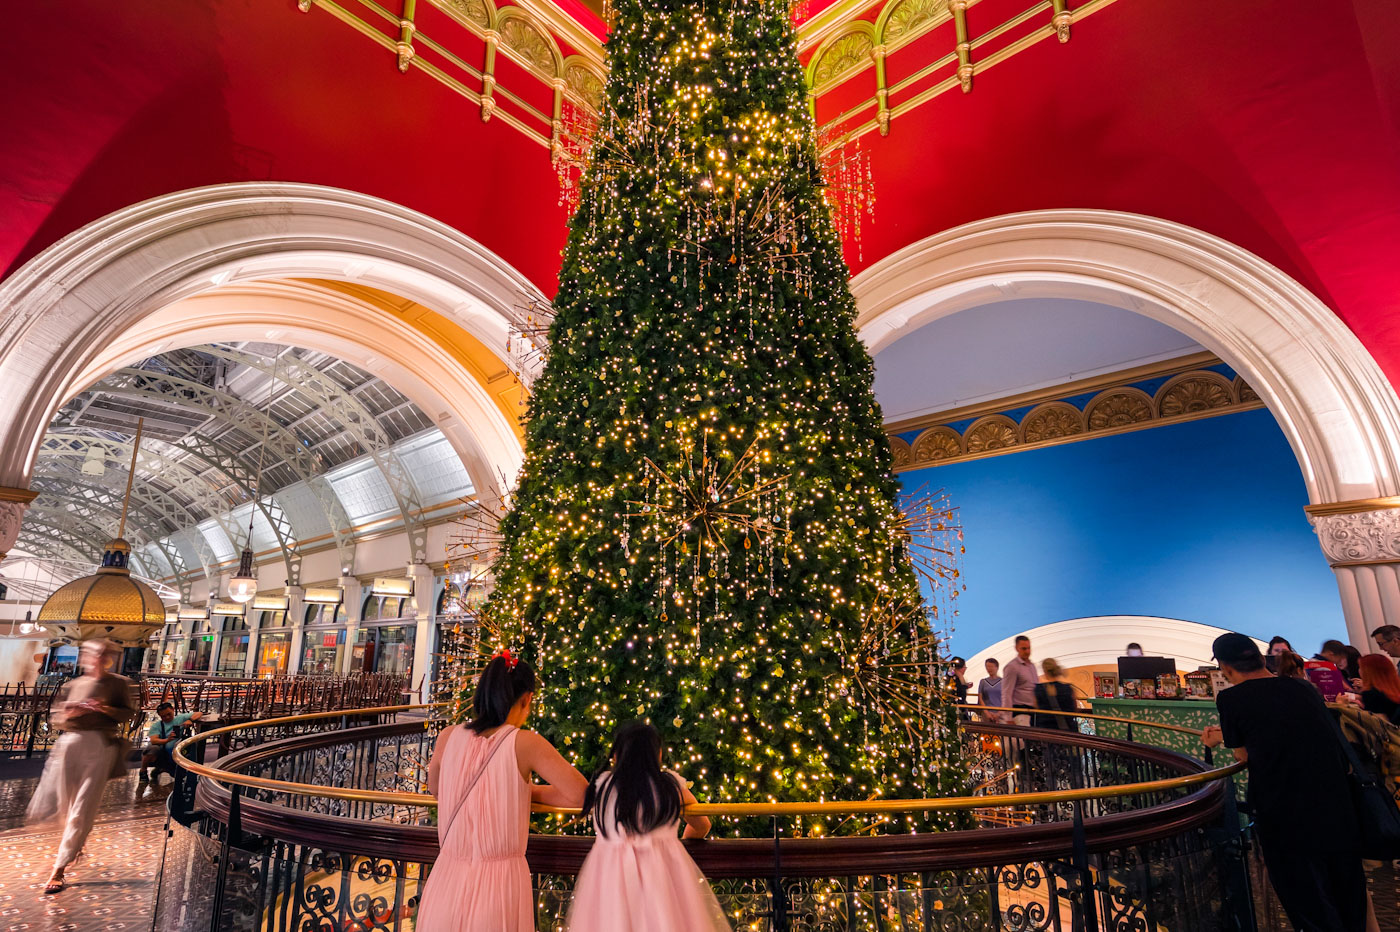 The Queen Victoria Building Christmas tree greeting shoppers during the Christmas season